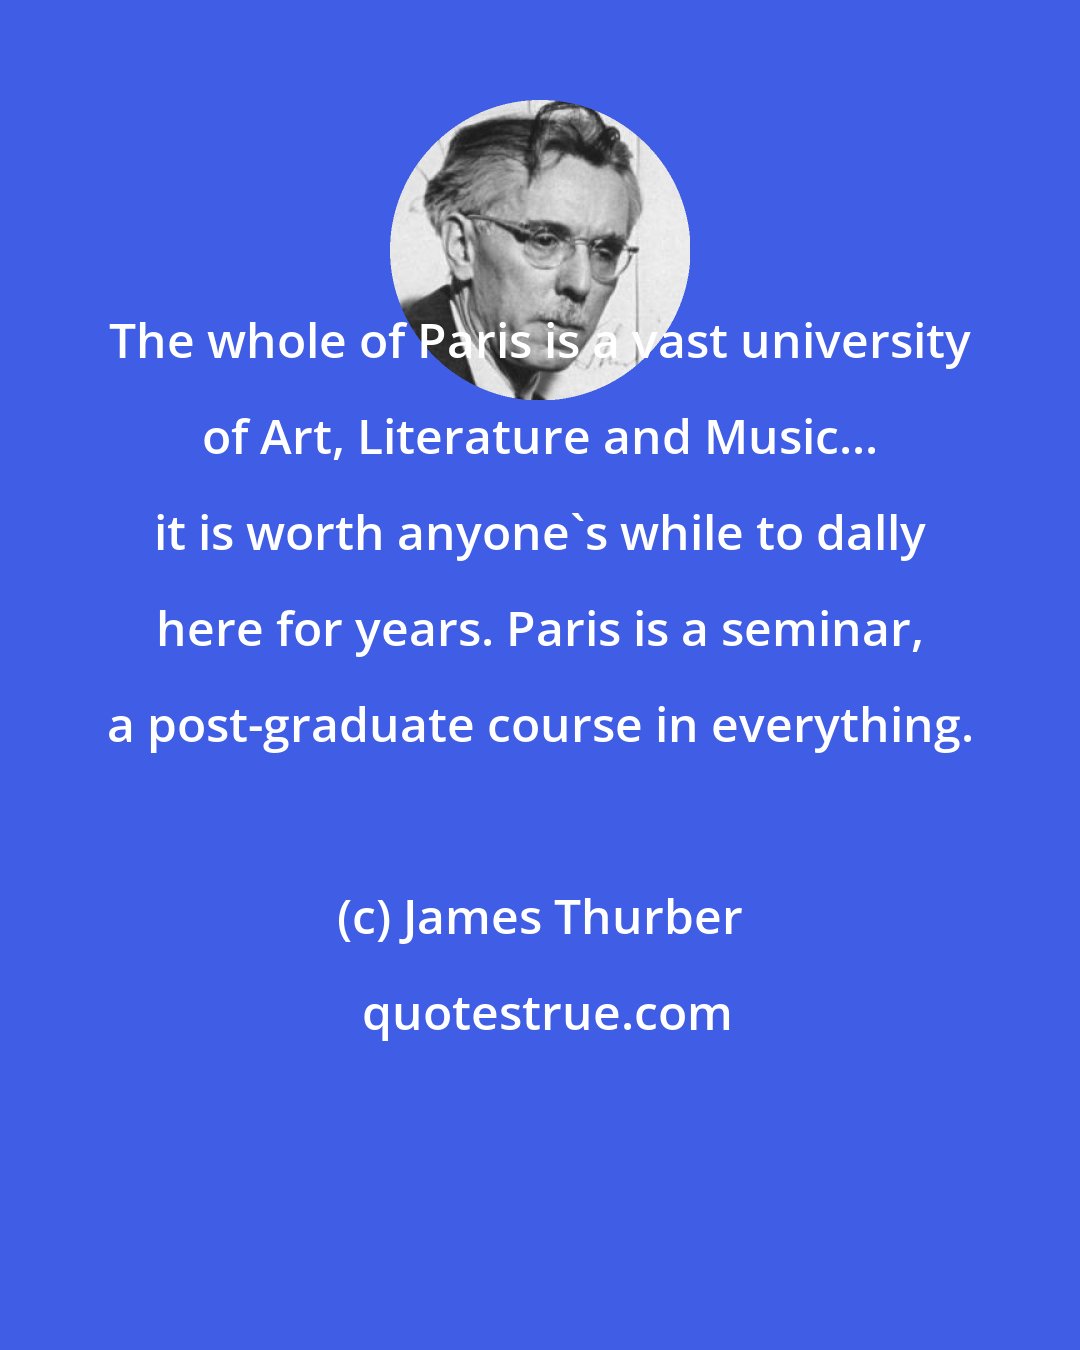 James Thurber: The whole of Paris is a vast university of Art, Literature and Music... it is worth anyone's while to dally here for years. Paris is a seminar, a post-graduate course in everything.